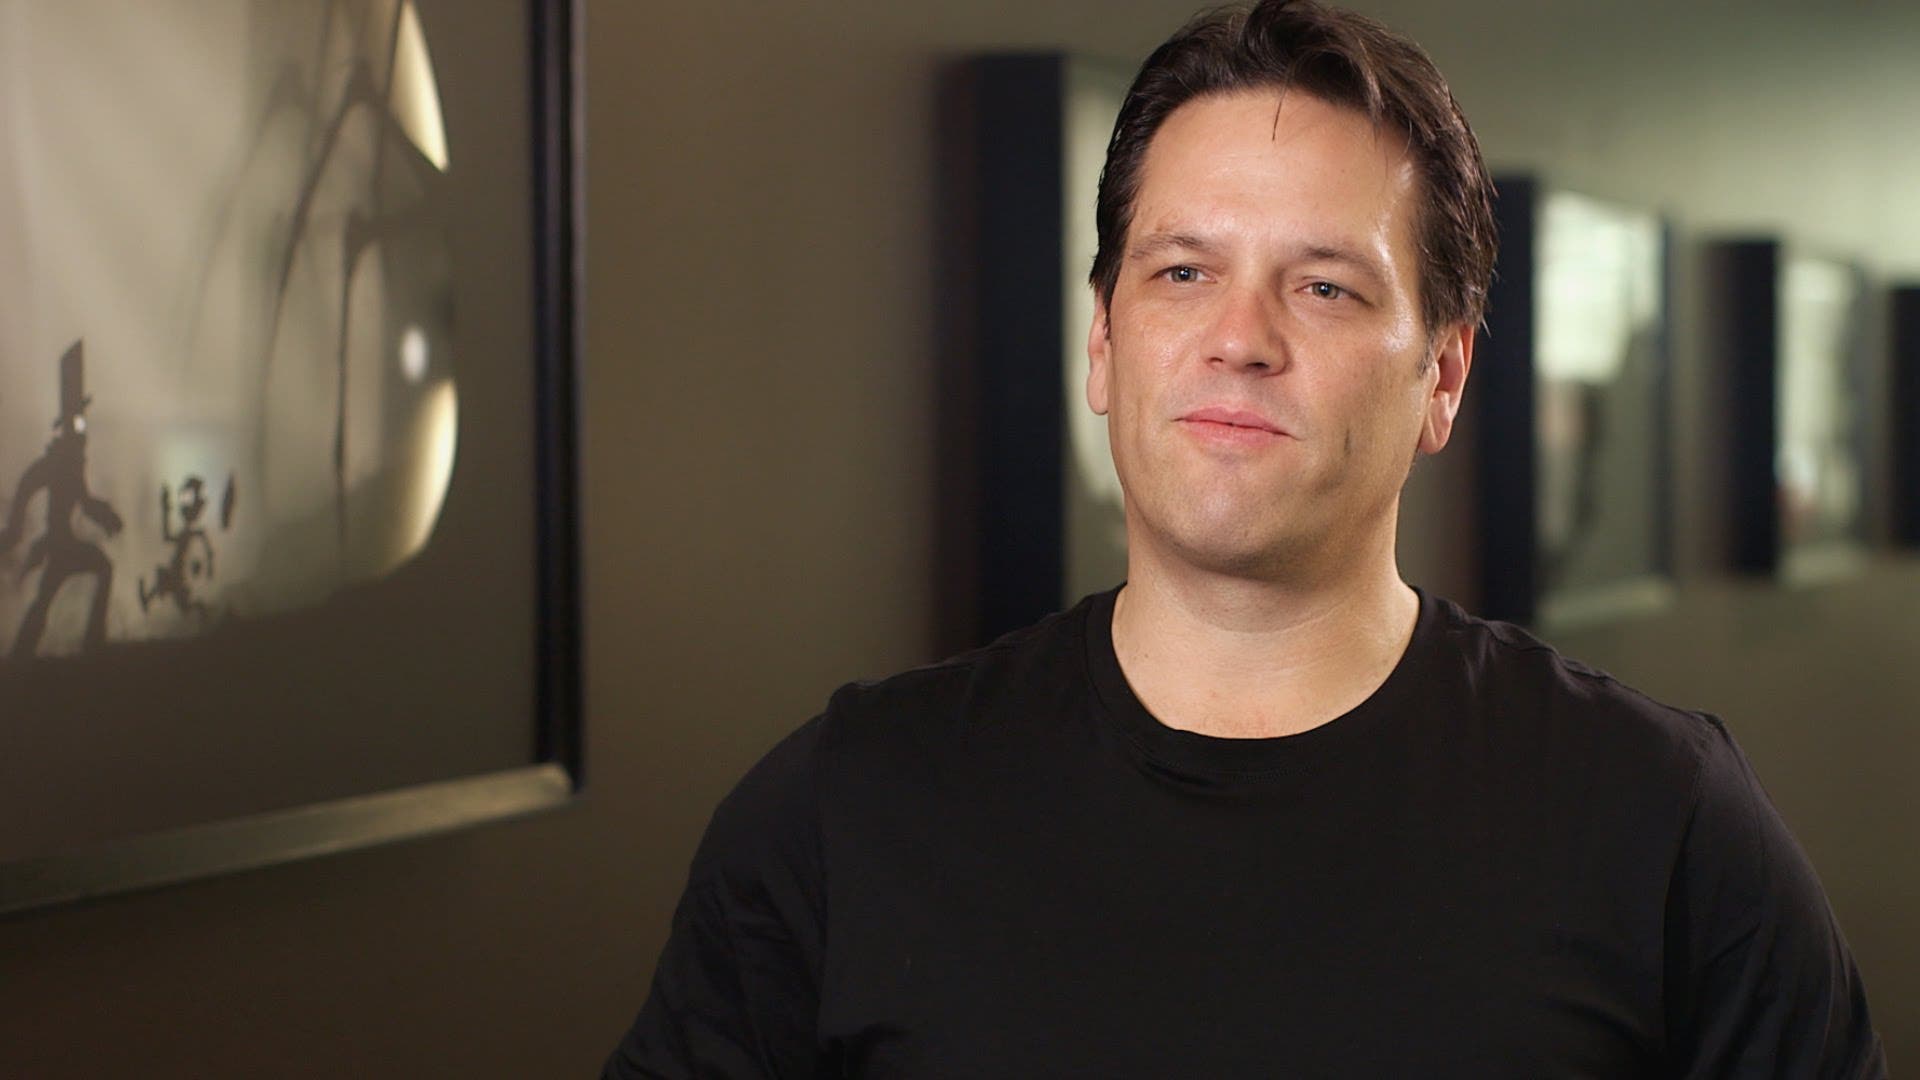 Phil Spencer will allow the creation of a workers’ union at Raven Software